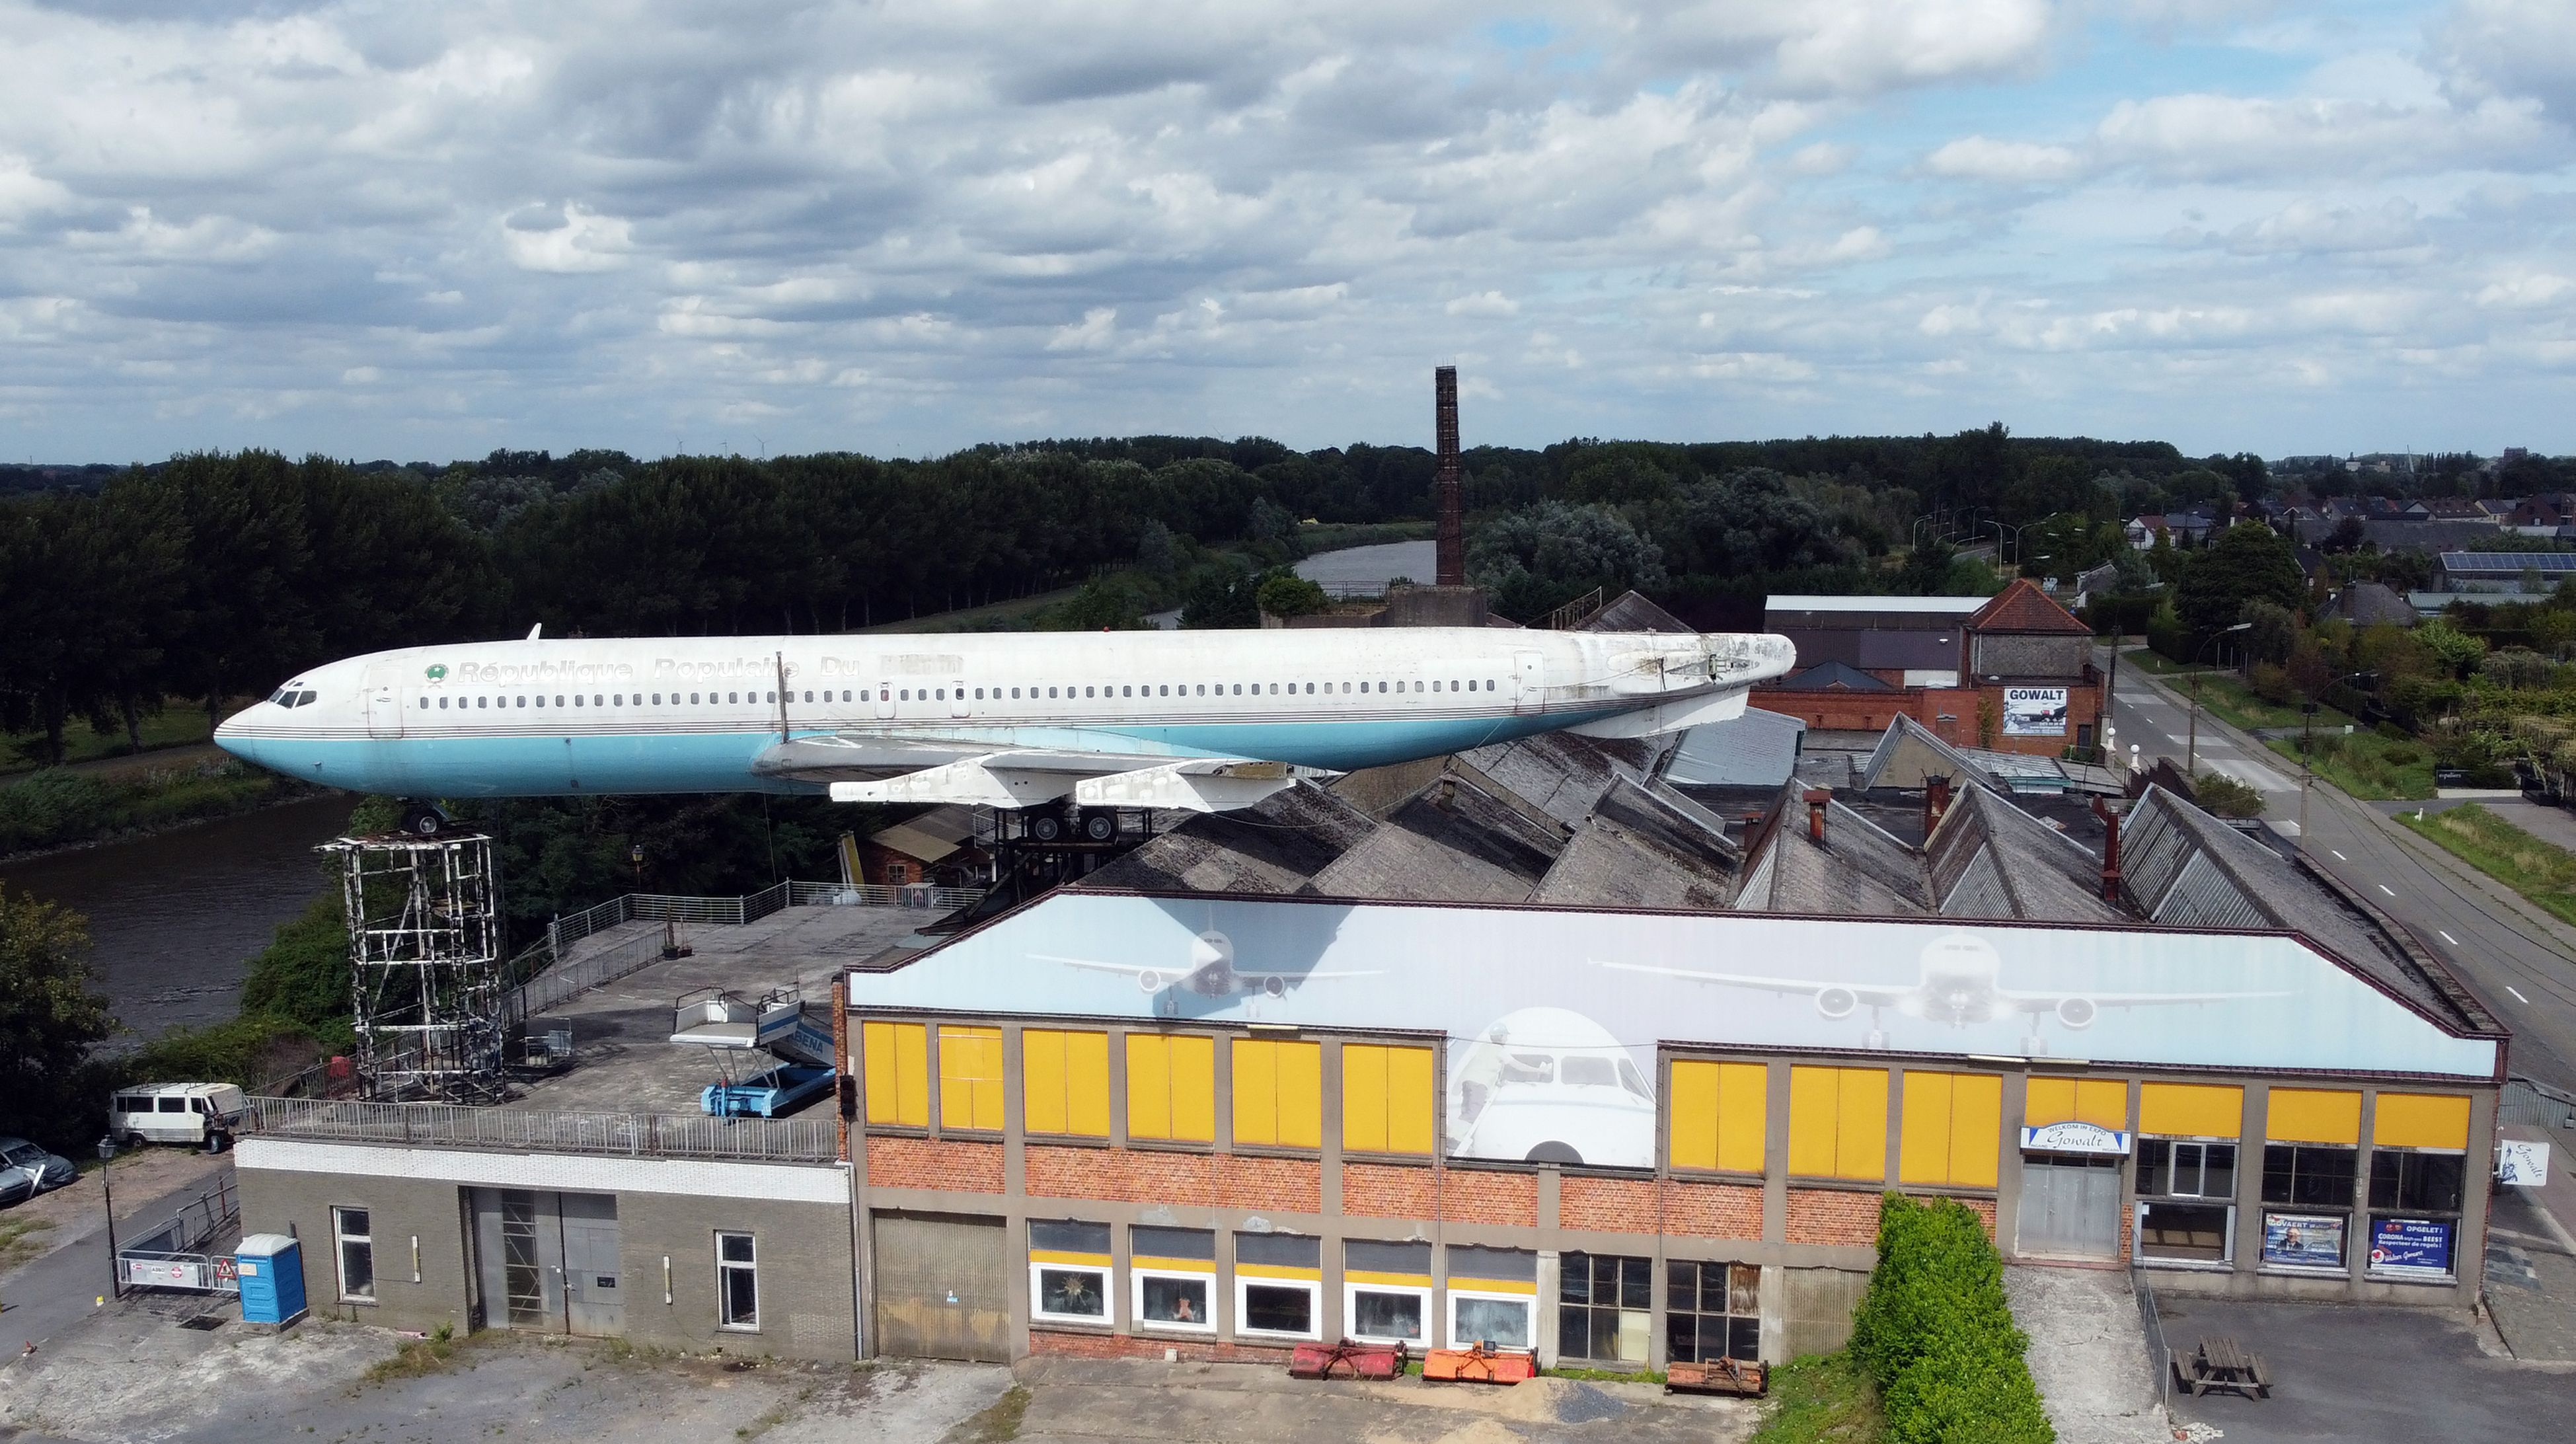 The Story Of Belgium's Abandoned Boeing 707